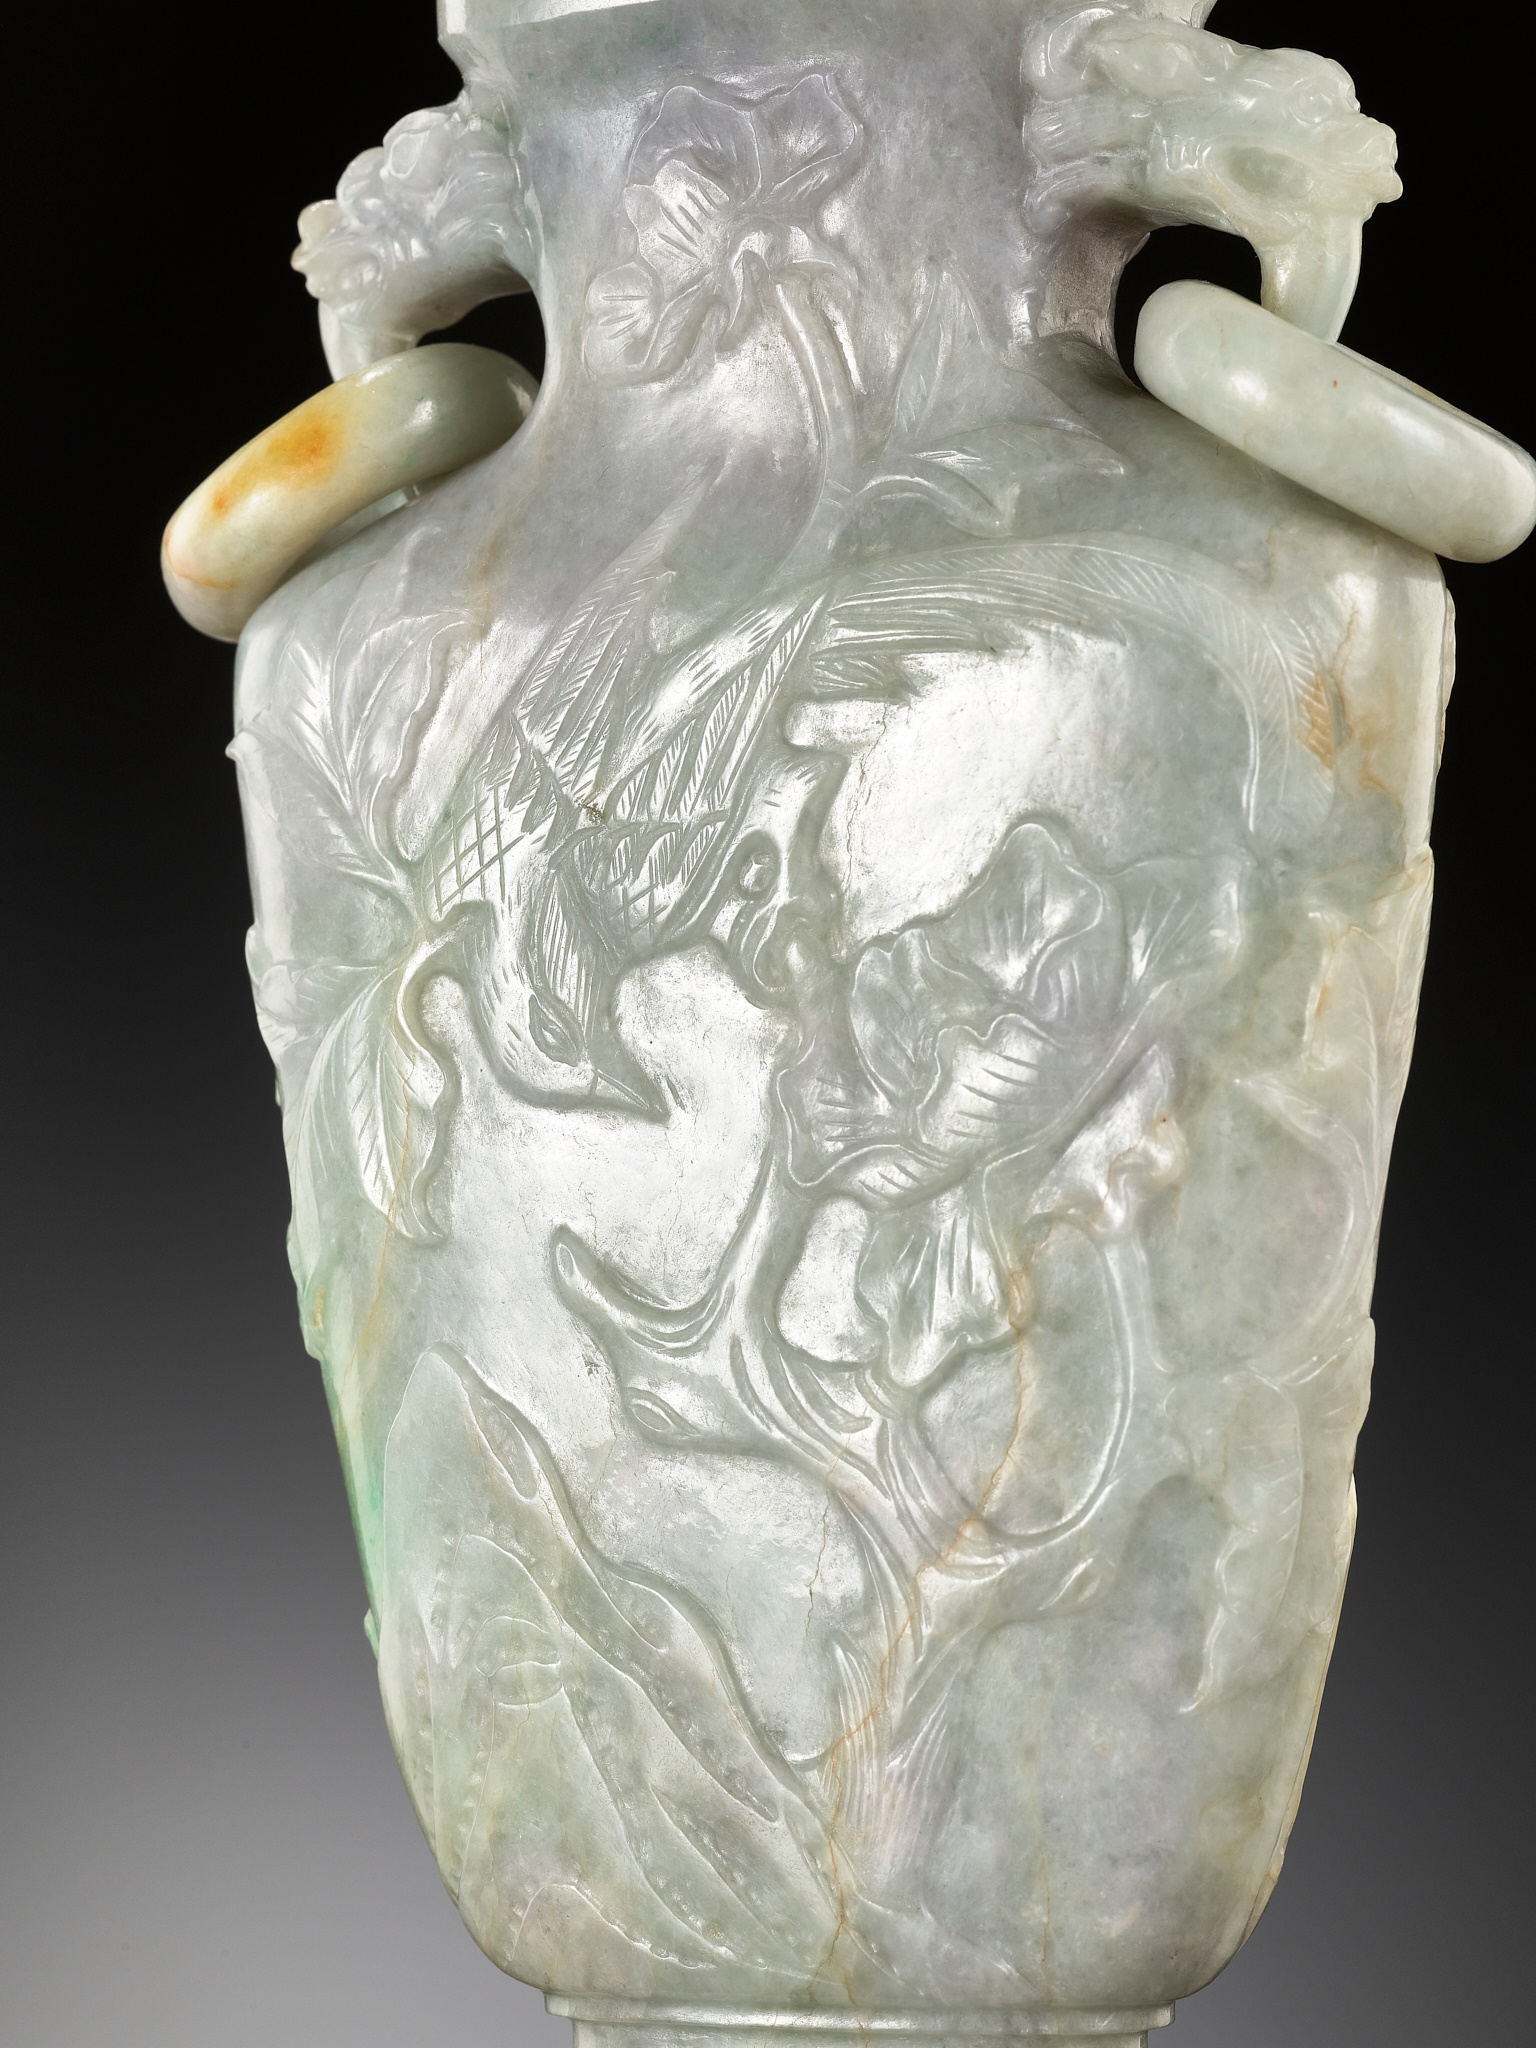 A JADEITE BALUSTER VASE AND COVER, LATE QING DYNASTY TO REPUBLIC PERIOD - Image 10 of 12